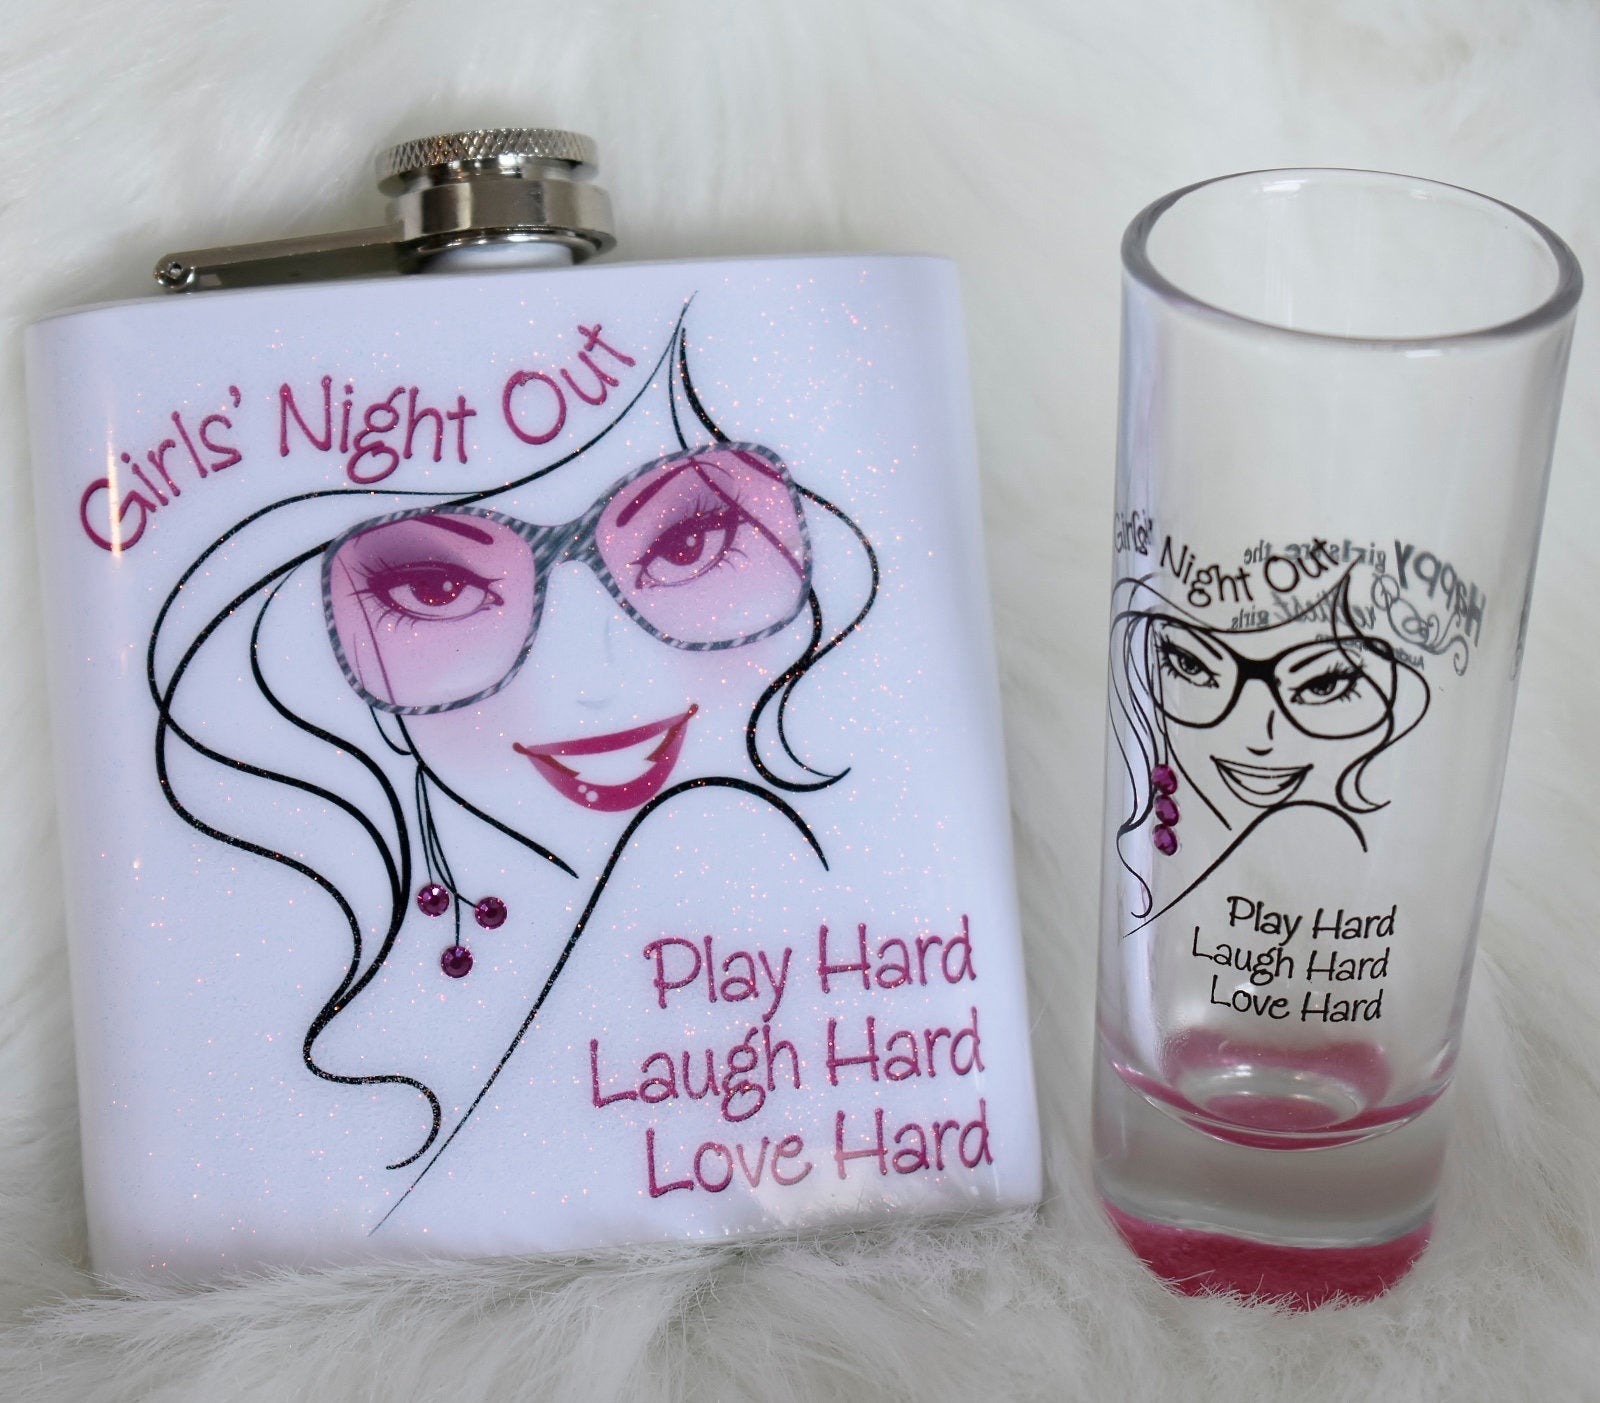 Girls Night Out Bachelorette Party Glitter Flask Shot Glass set Favors Bridesmaid Gifts for Her Girlfriend Weekend